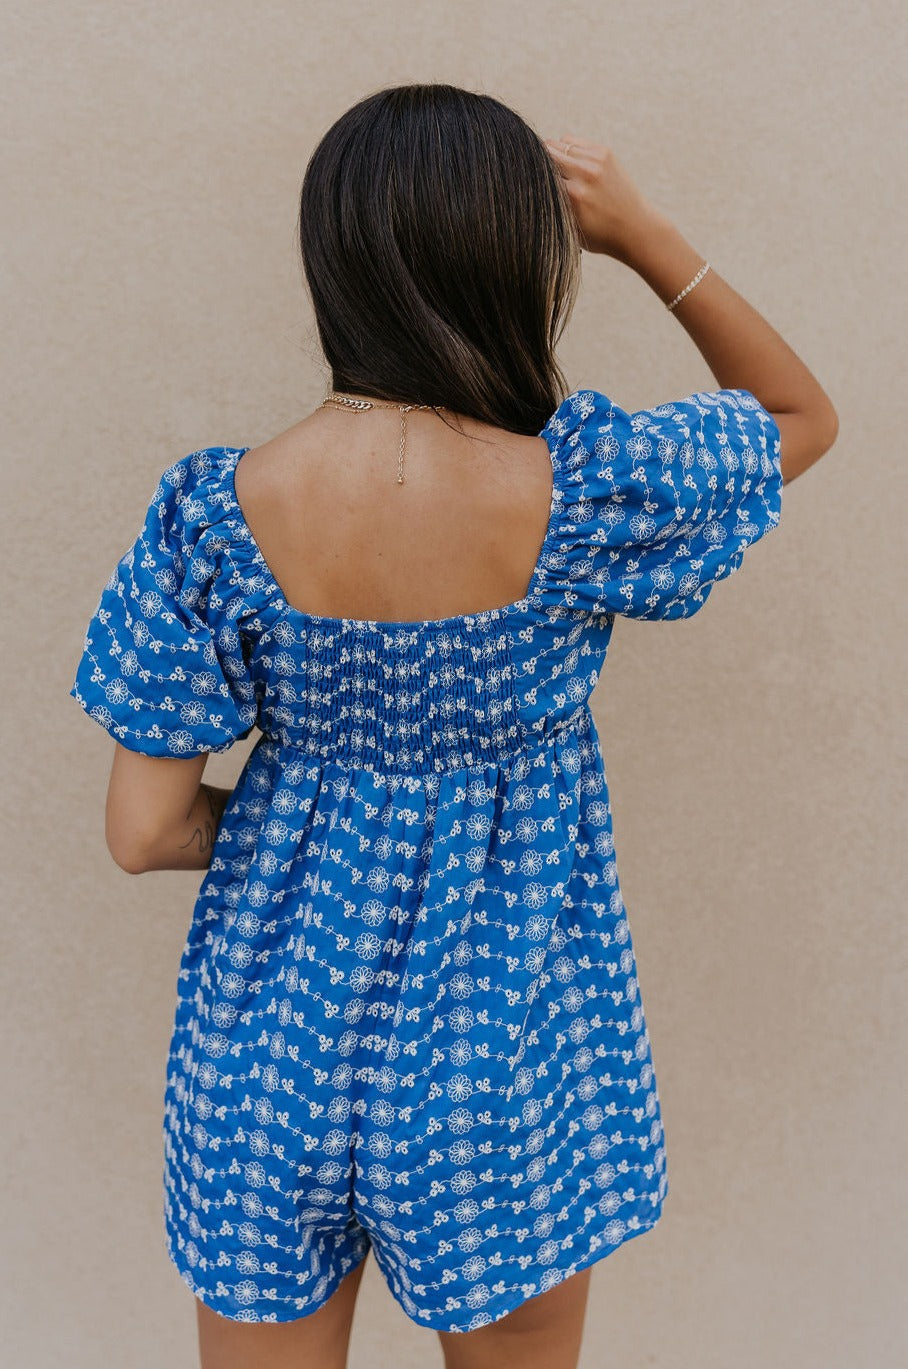 Back view of model wearing the Marissa Blue and White Floral Short Sleeve Romper which features Blue Lightweight Fabric, White Floral Design, Blue Lining, Square Neckline, Short Puff Sleeves and Smocked Back.